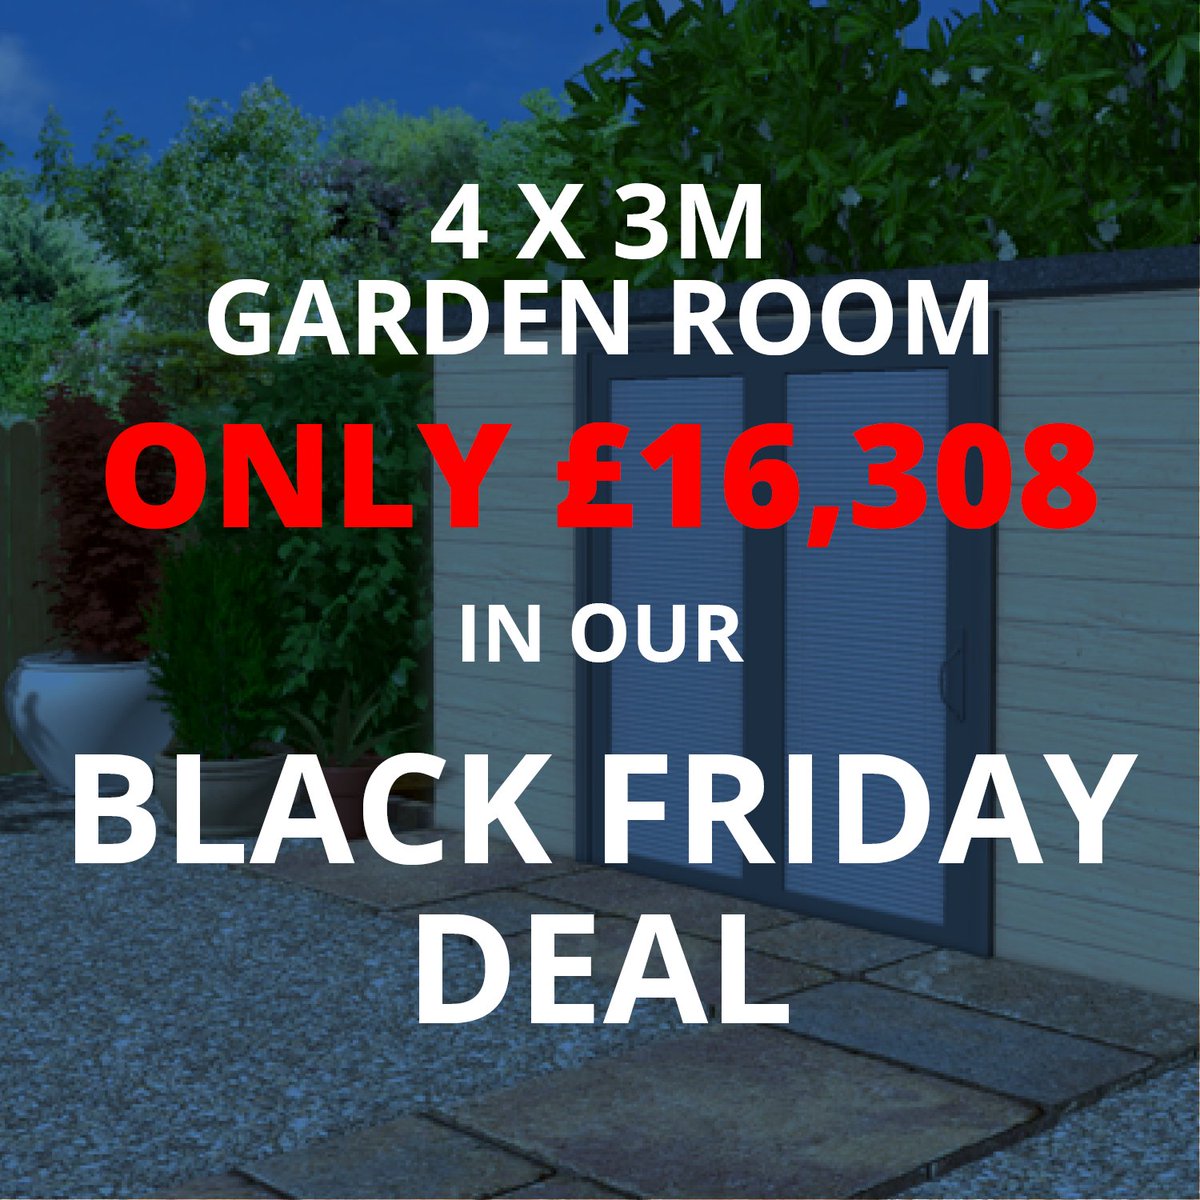 *** BLACK FRIDAY OFFER *** Buy a 4 x 3 metre #gardenroom for just £16,308 (+ vat). Think this is too good to be true? Take a look at what’s included over on our website: buff.ly/3fRpCjD #blackfridaydeal #gardenoffice